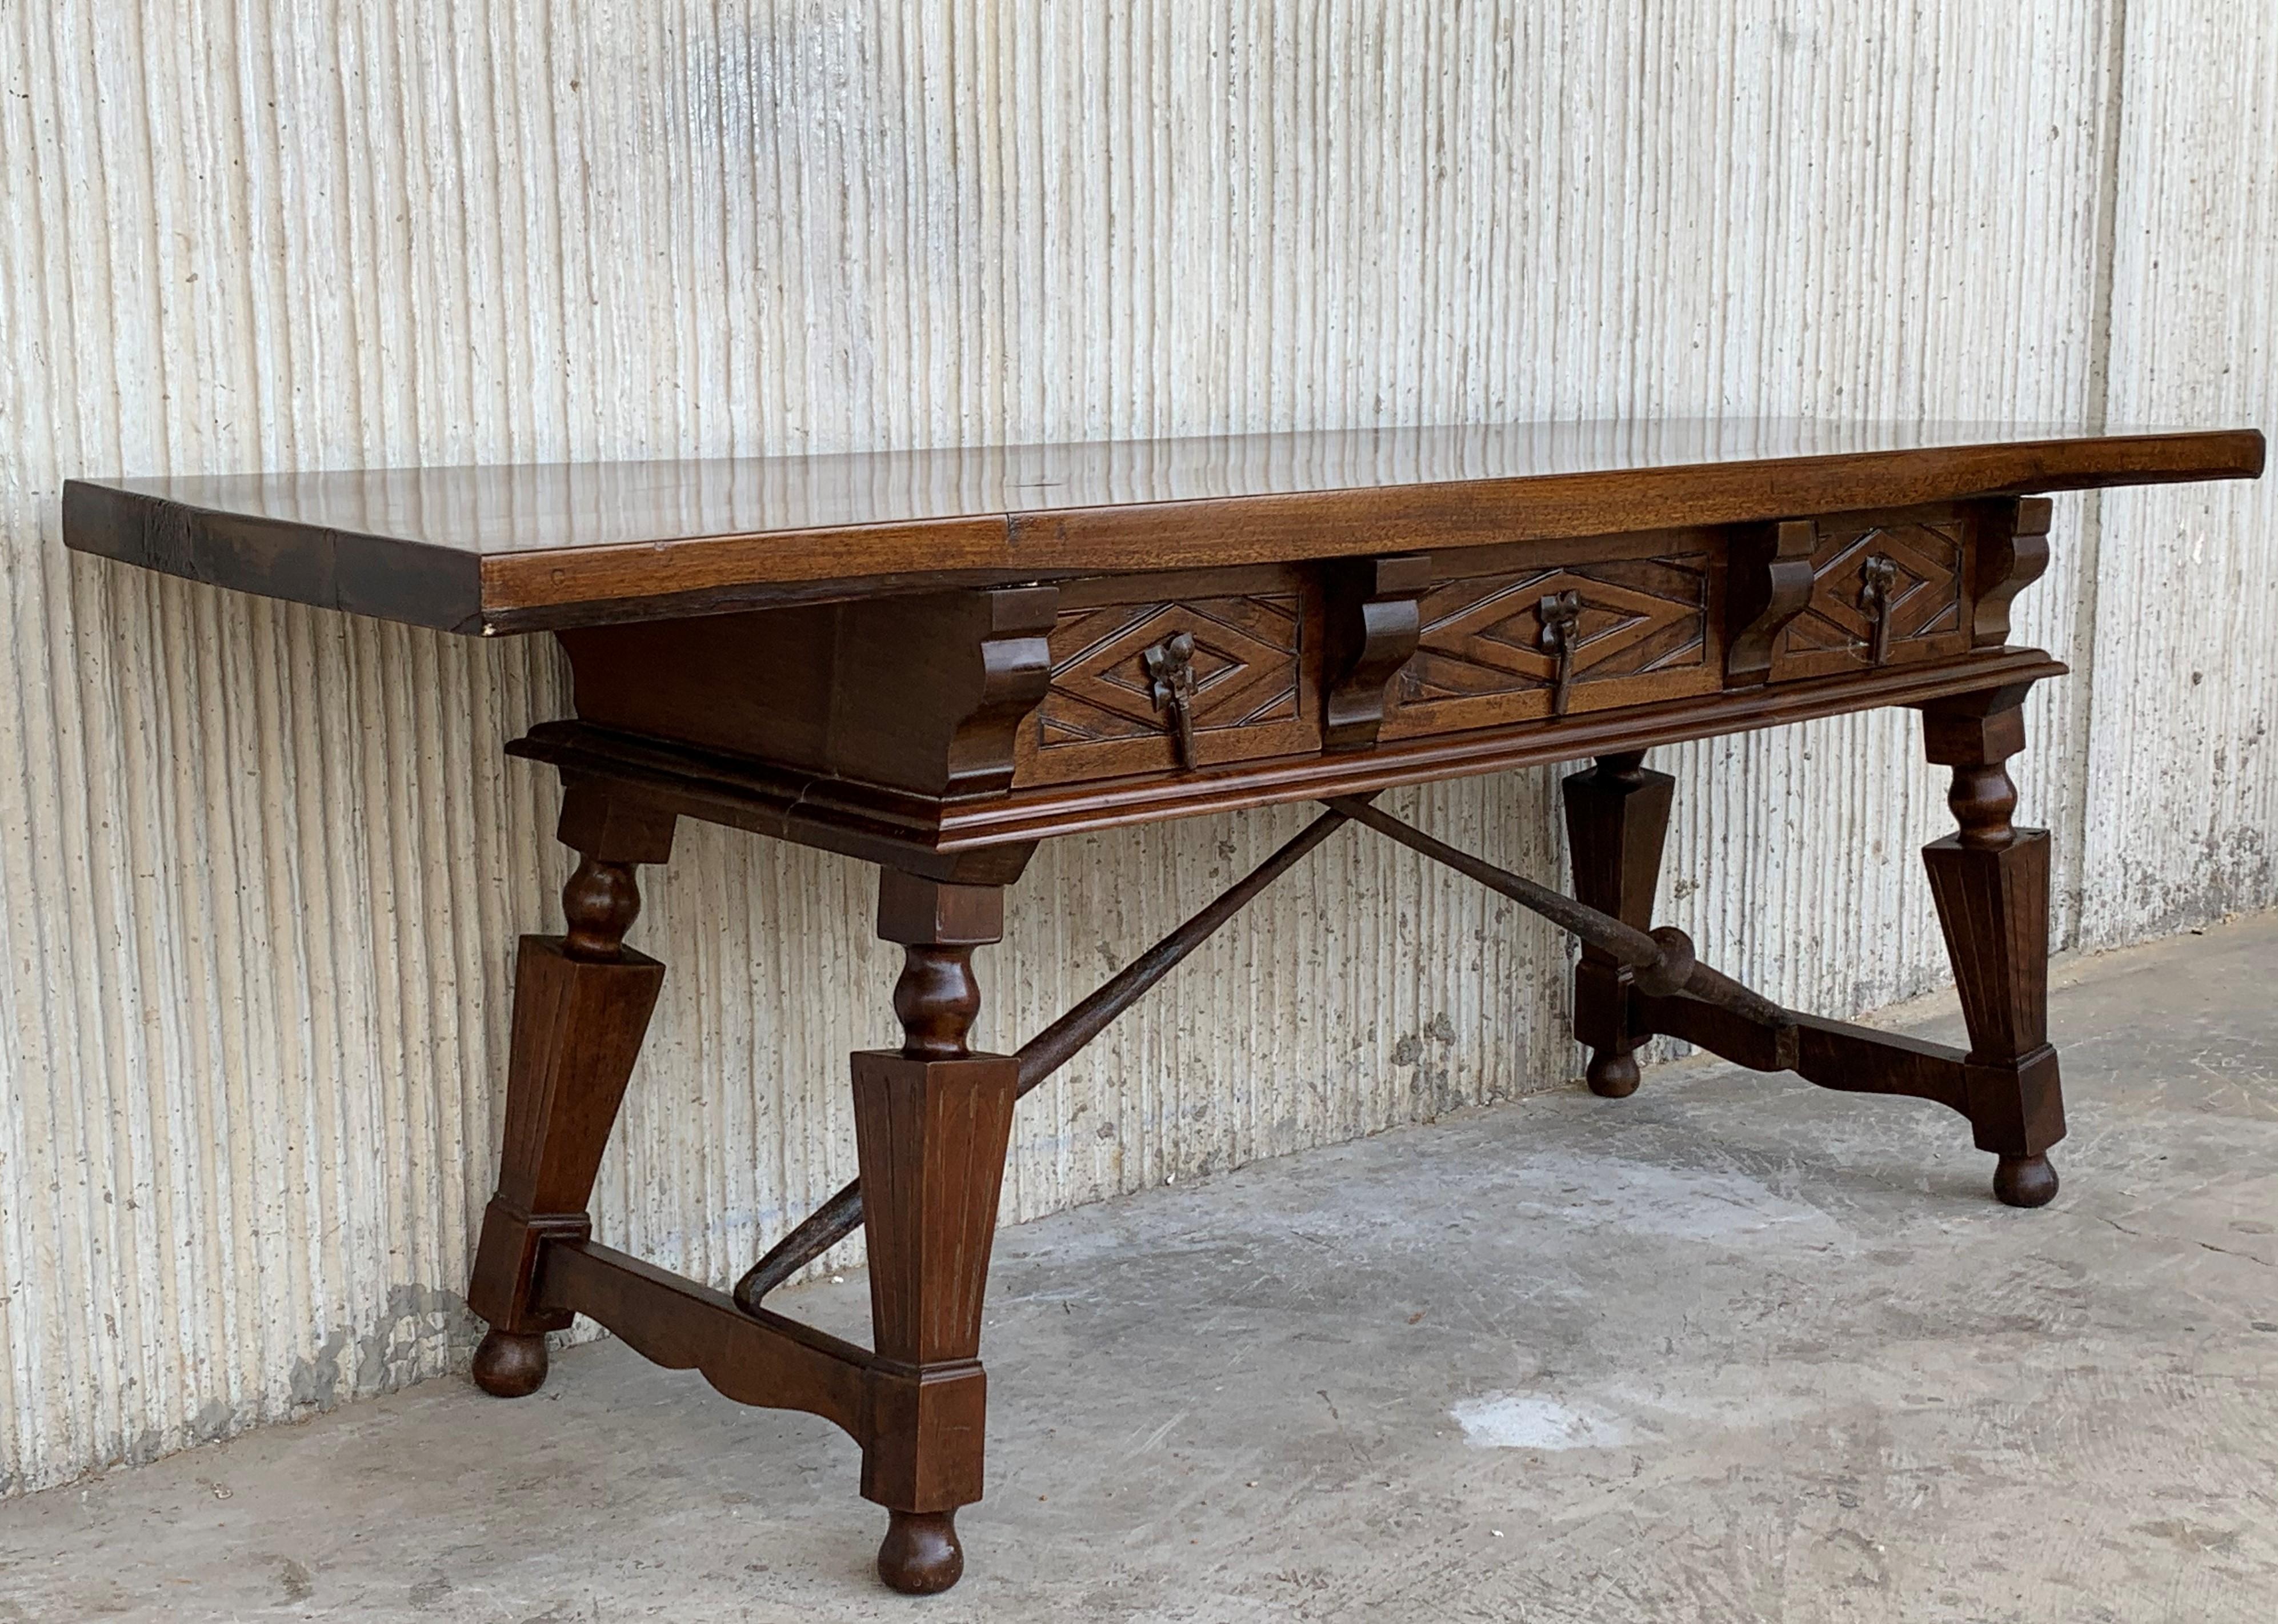 Baroque Spanish Bench or Low Console Table with Carved Drawers and Iron Stretcher